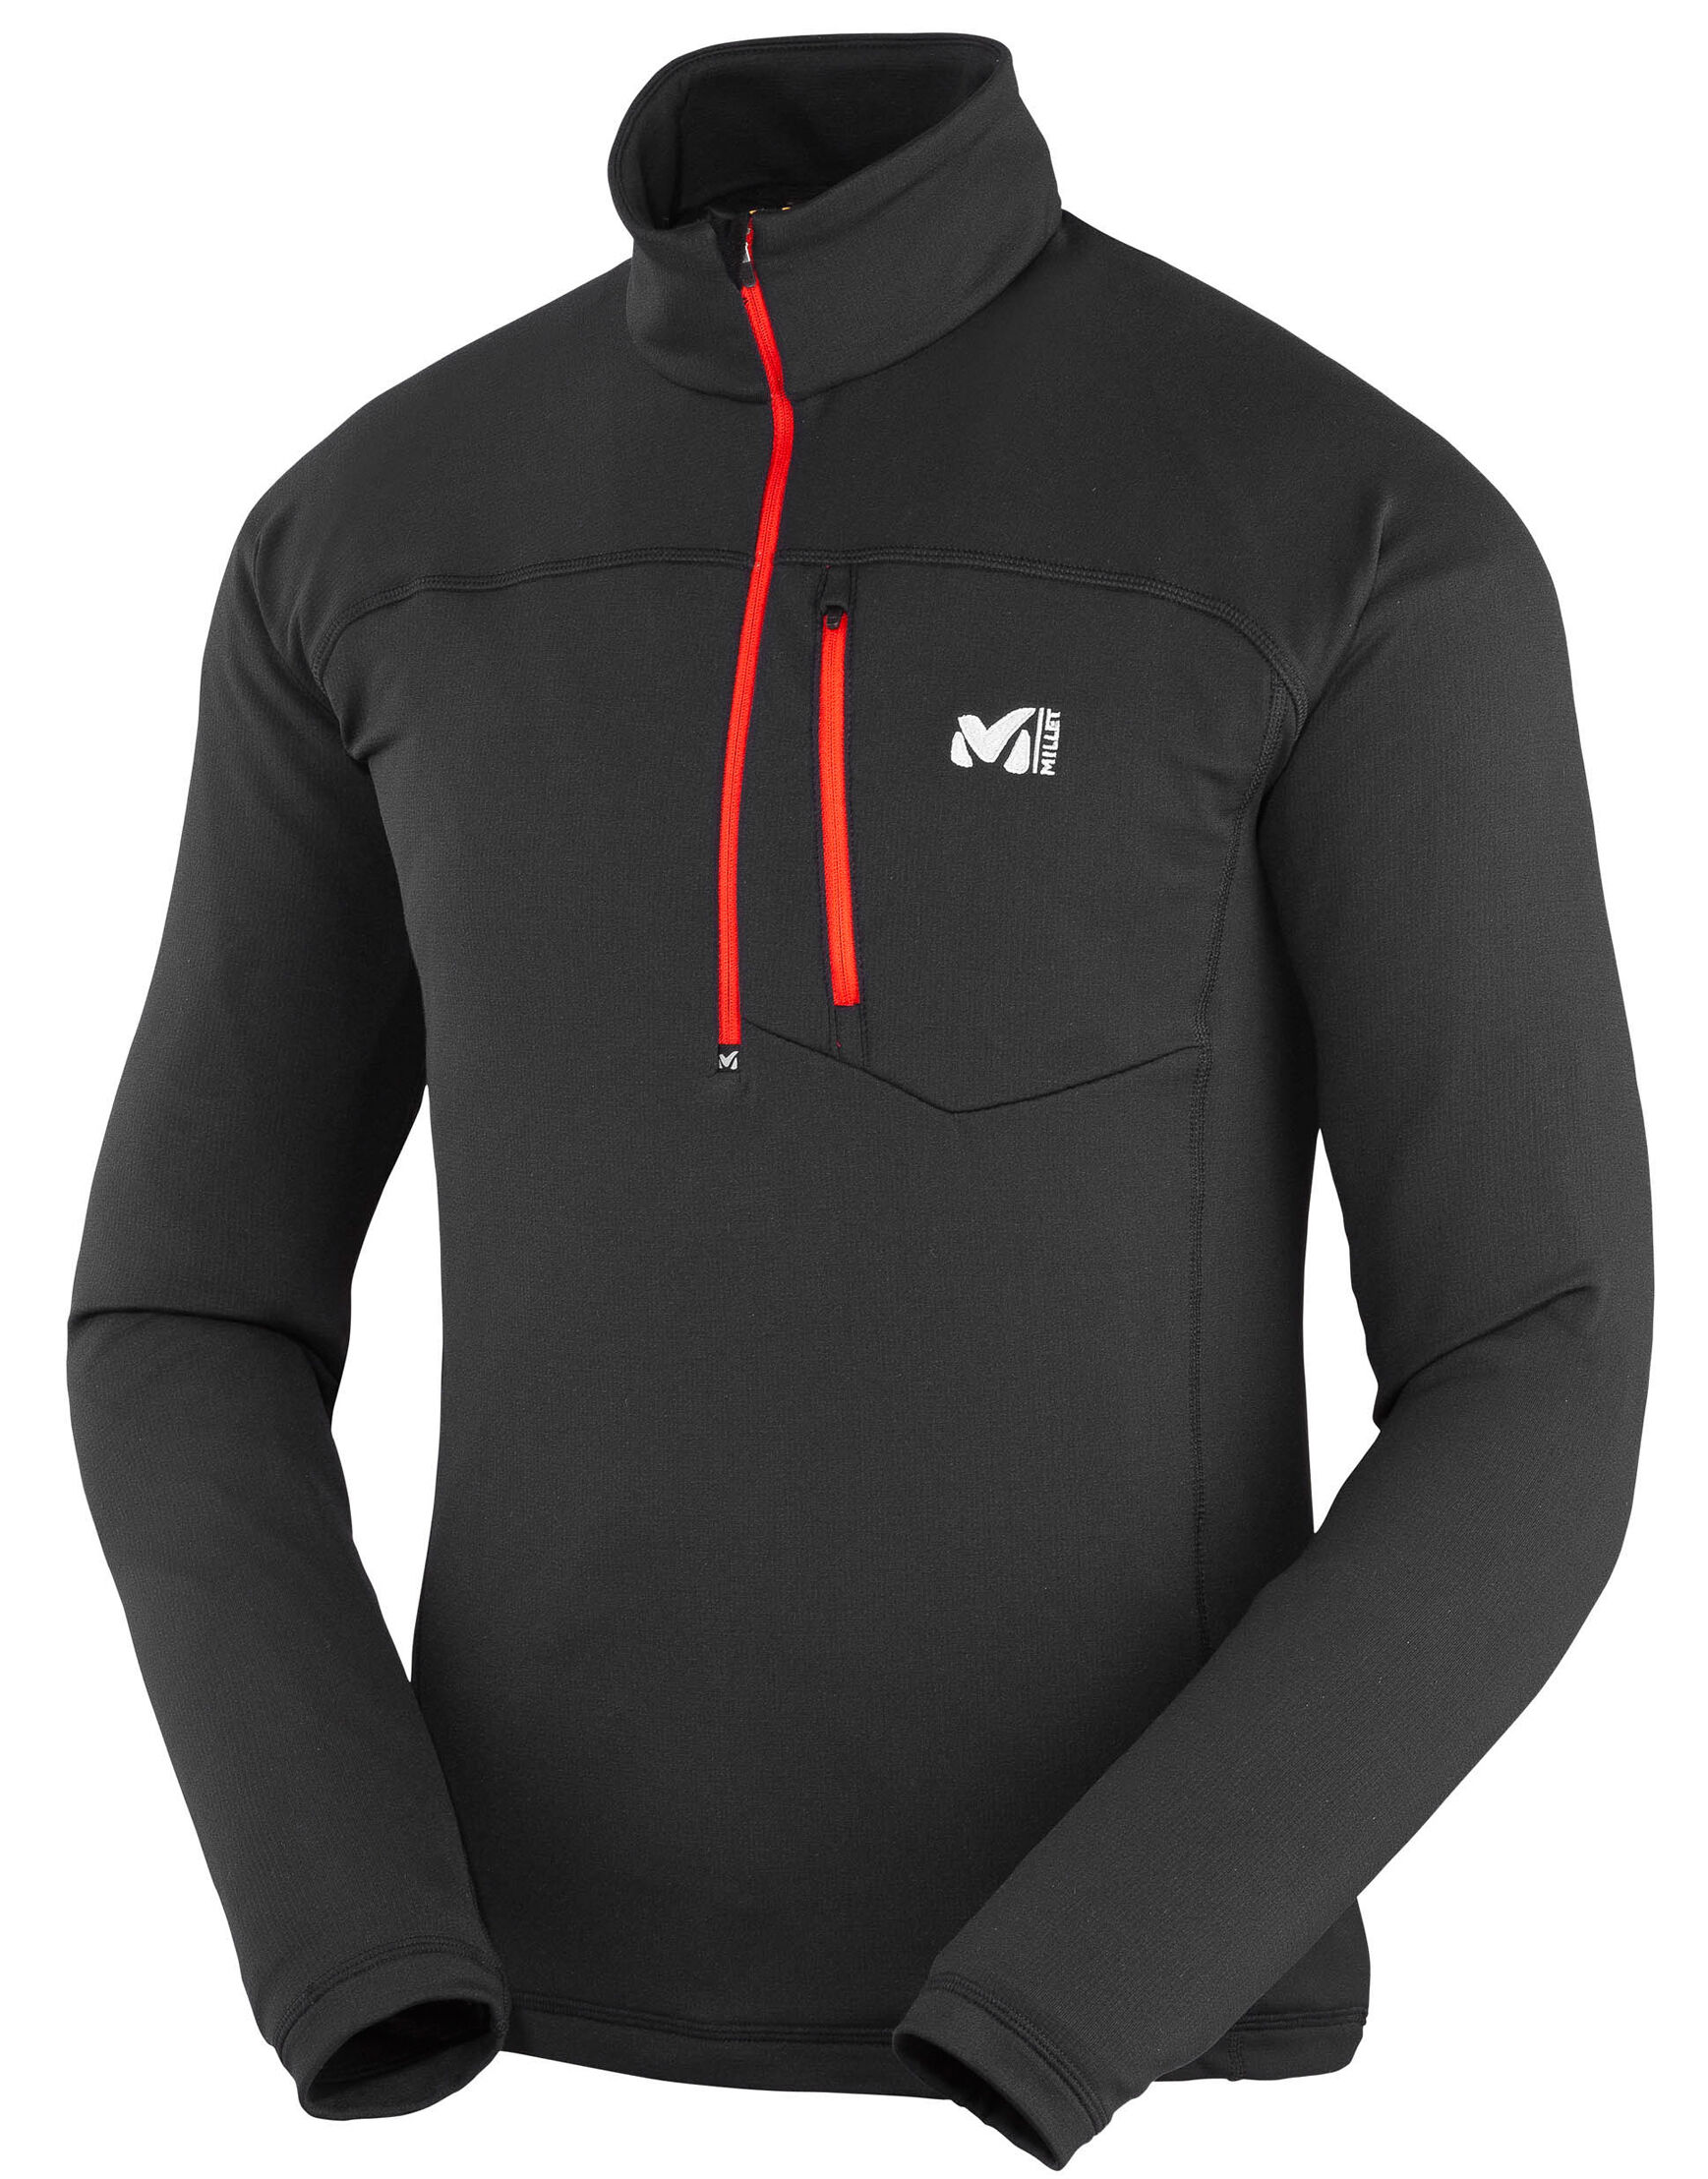 Millet - Technostretch Zip - Giacca in pile - Uomo